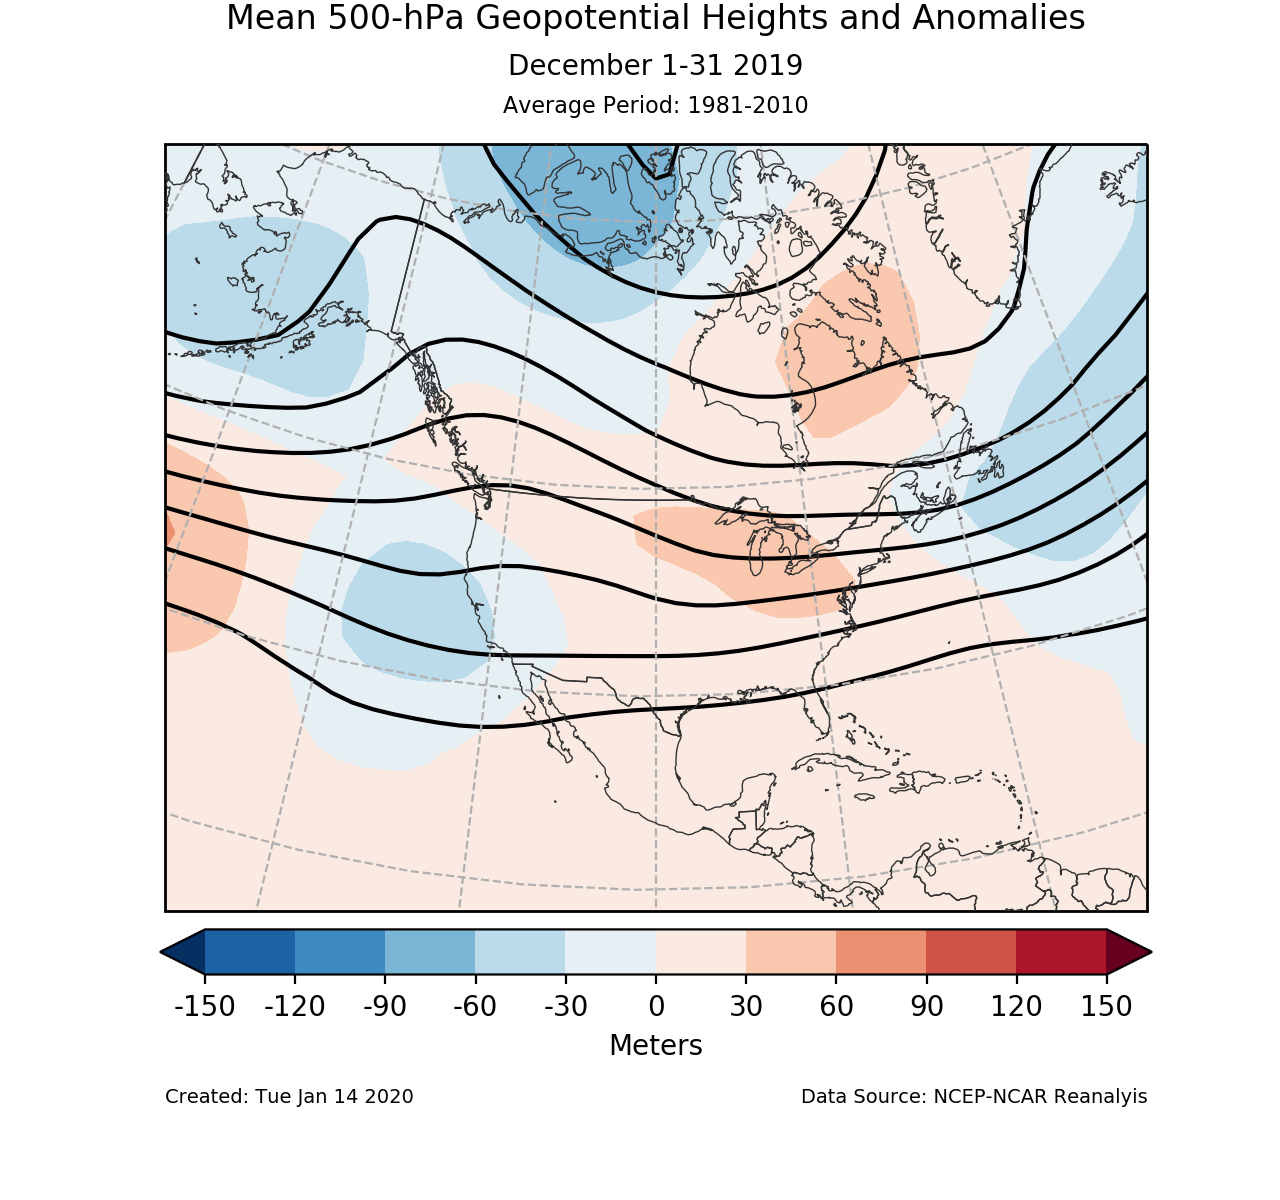 500-mb circulation anomalies for North America for December 2019